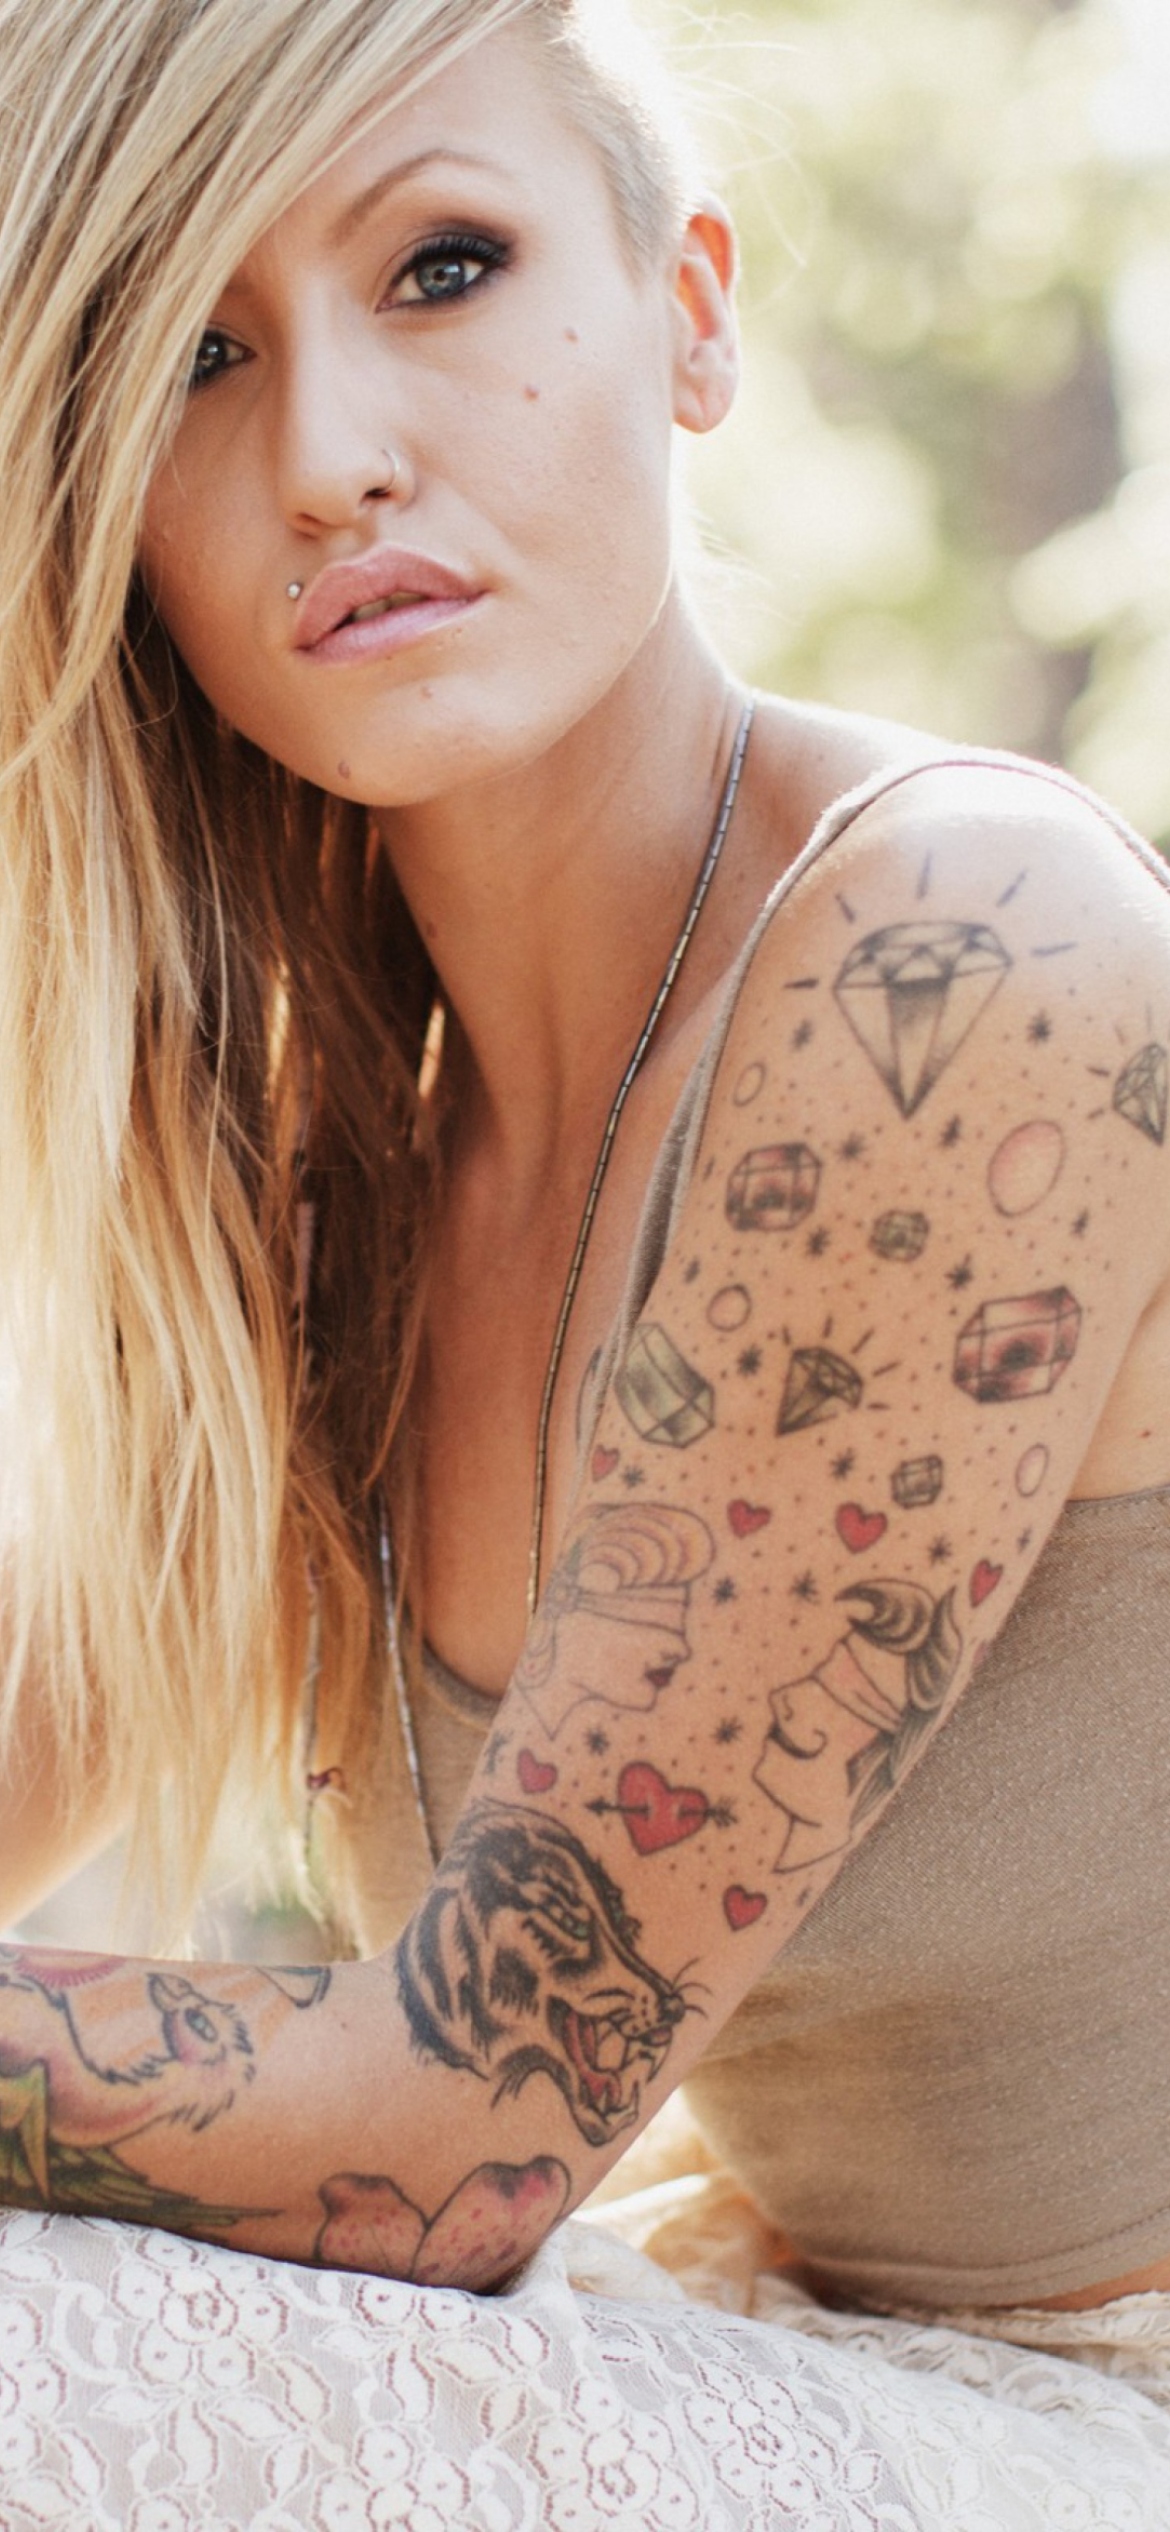 Blonde Model With Tattoes wallpaper 1170x2532